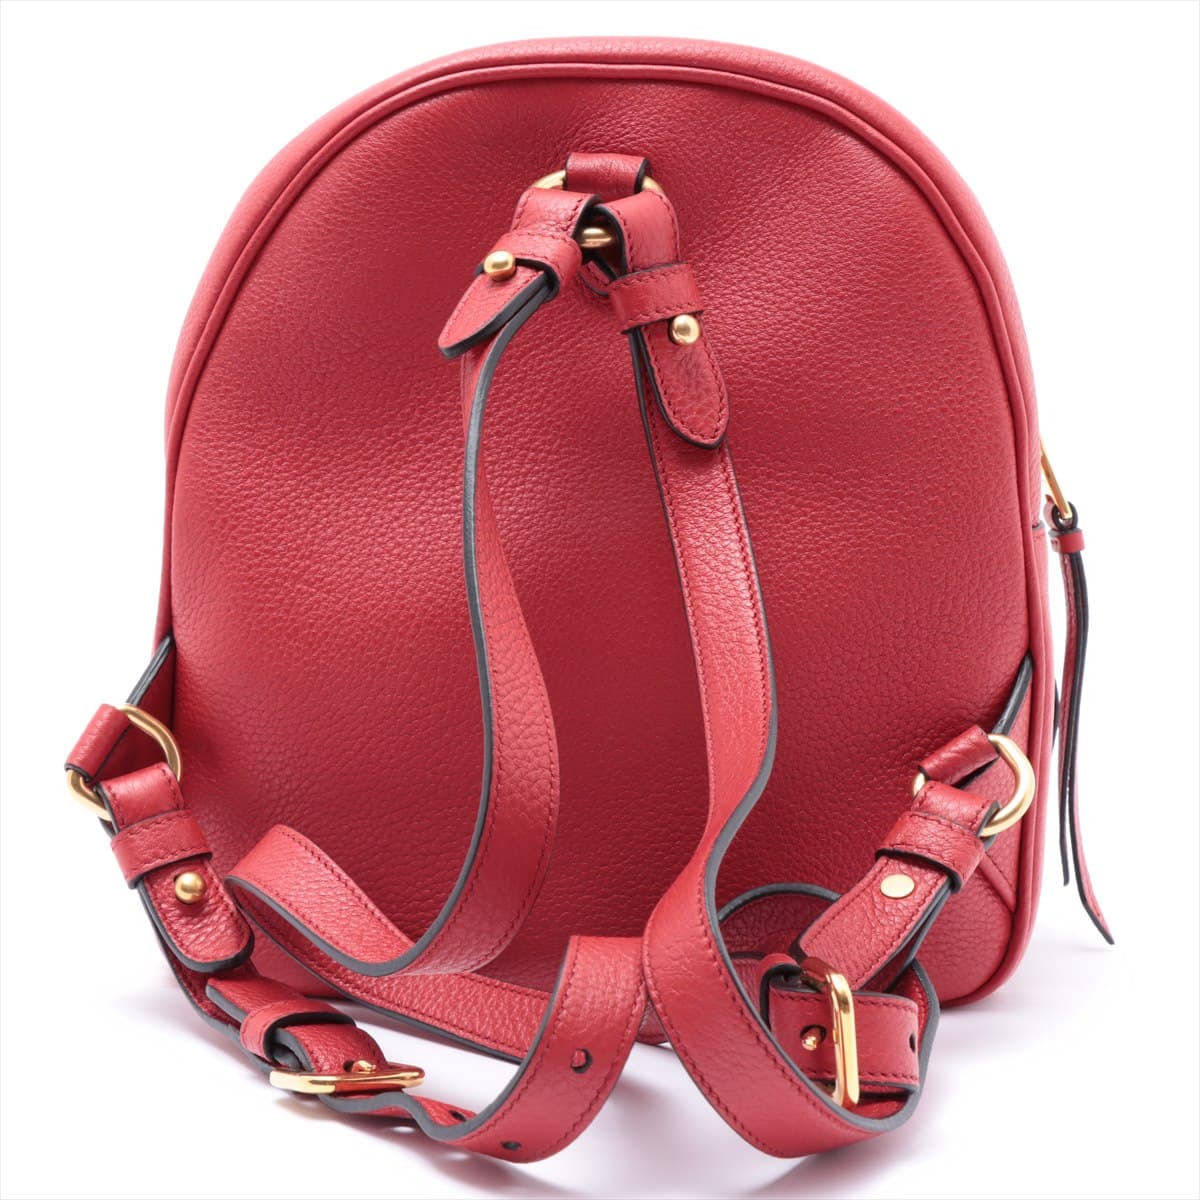 Prada Leather Backpack Red 1BZ051 open papers